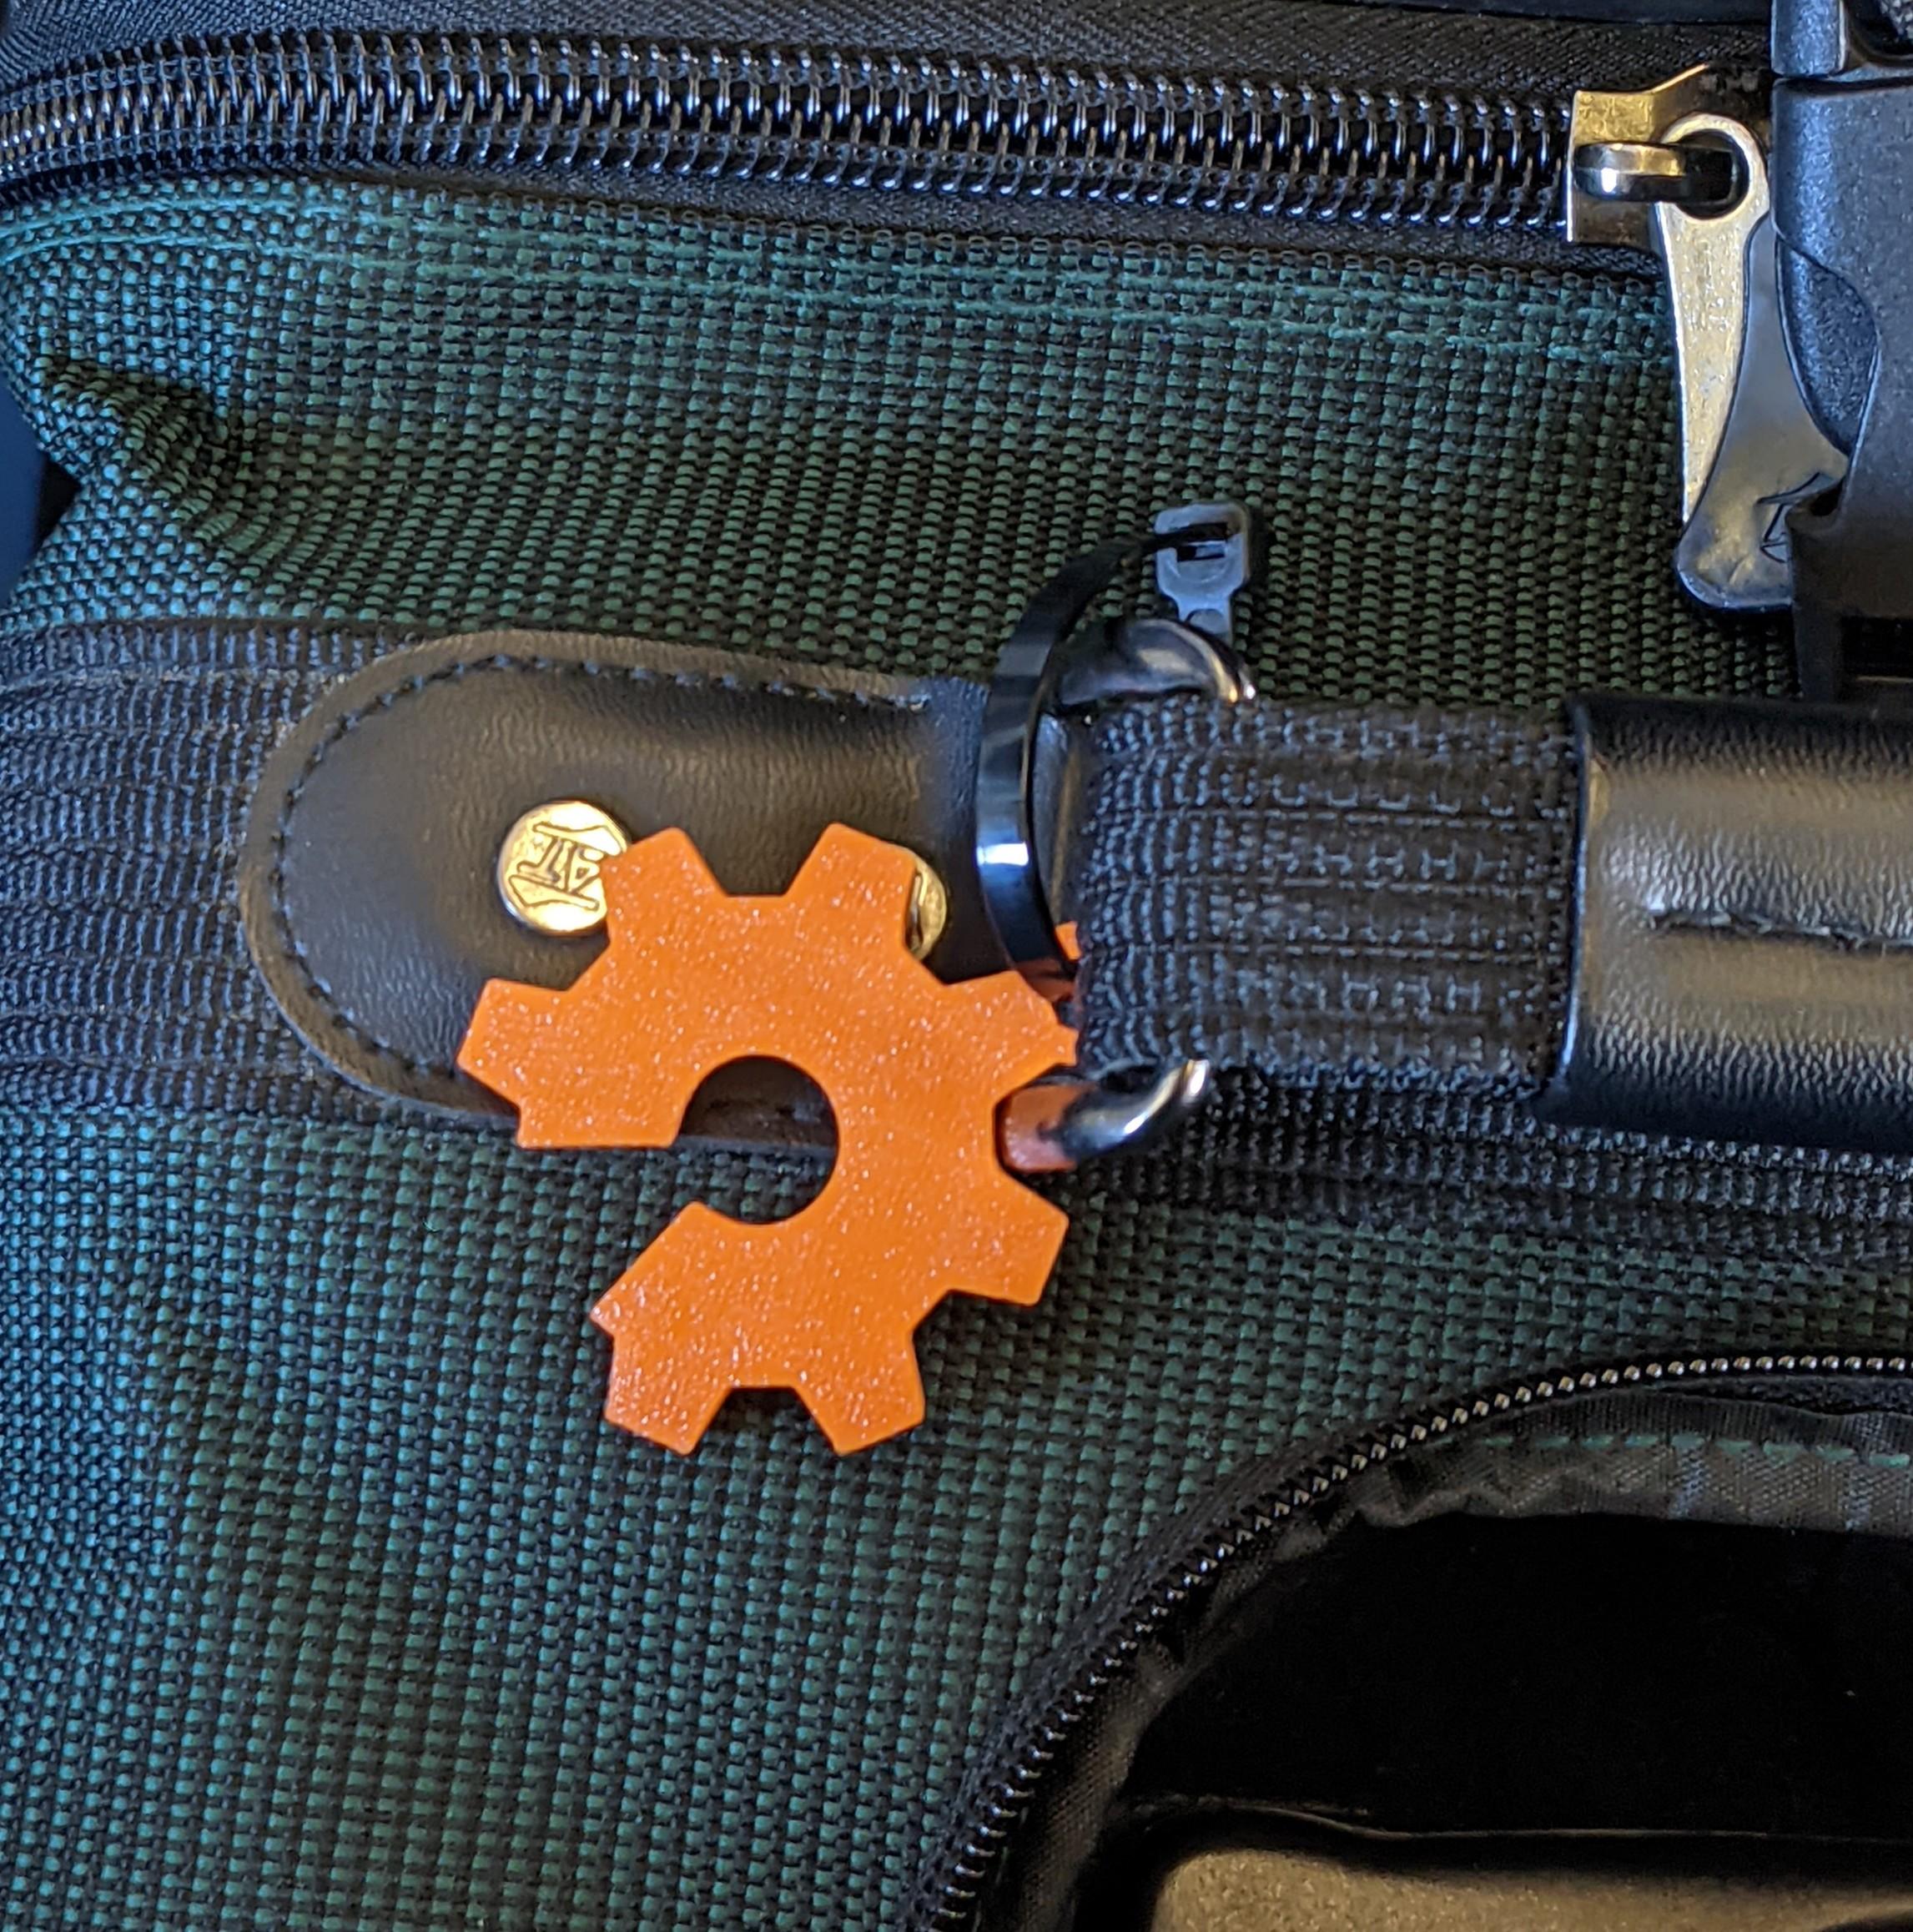 Open Source Key Chain - Makes a great luggage tag identifier to restart traveling! - 3d model